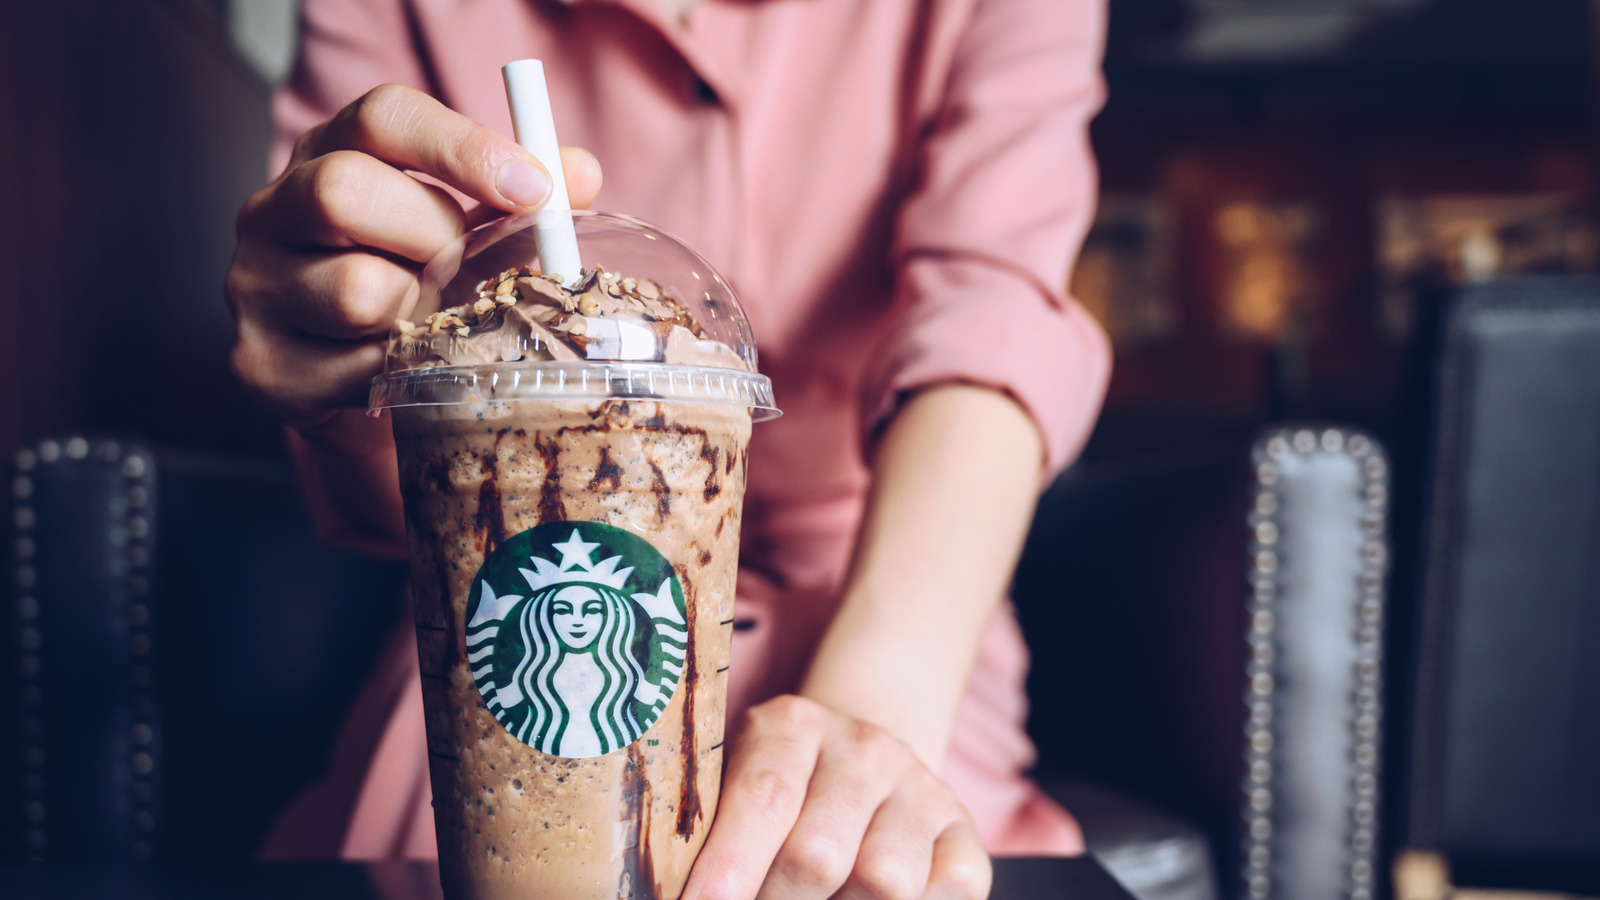 How To Order A Healthier Starbucks Drink, According To Our Dietitian – Health Digest